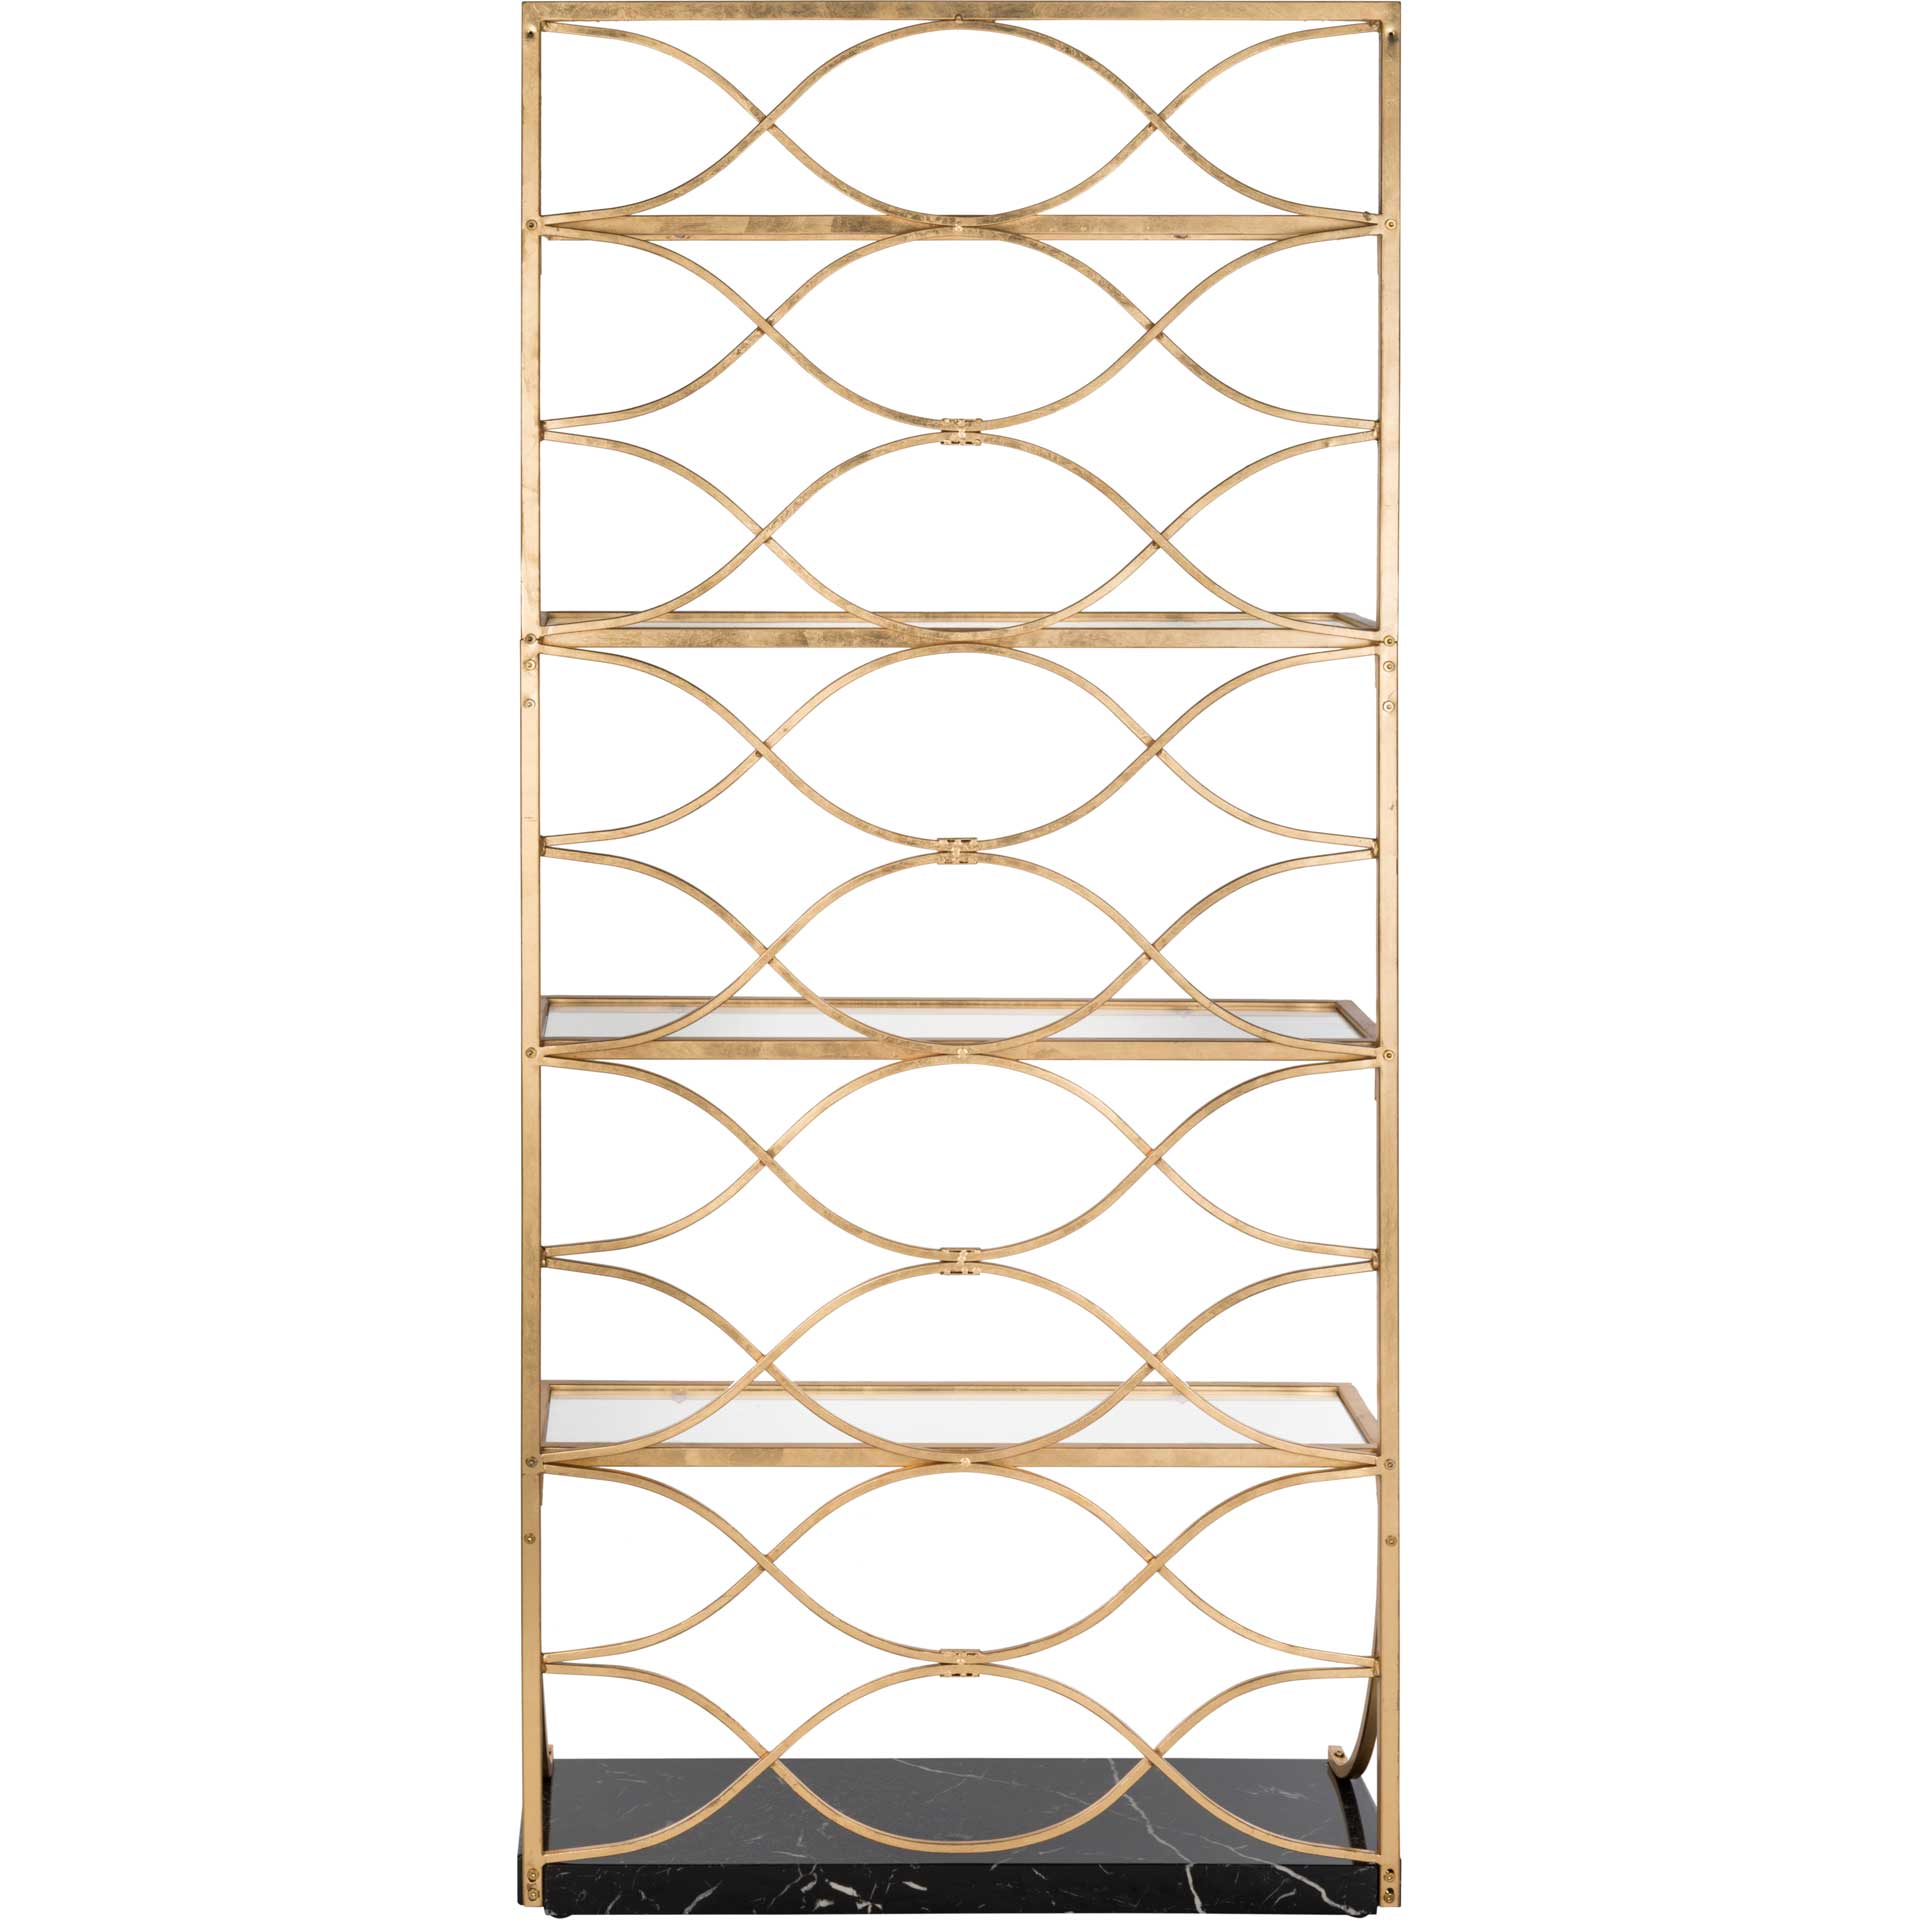 Sparkle Marble Base Etagere Gold/Black/Clear